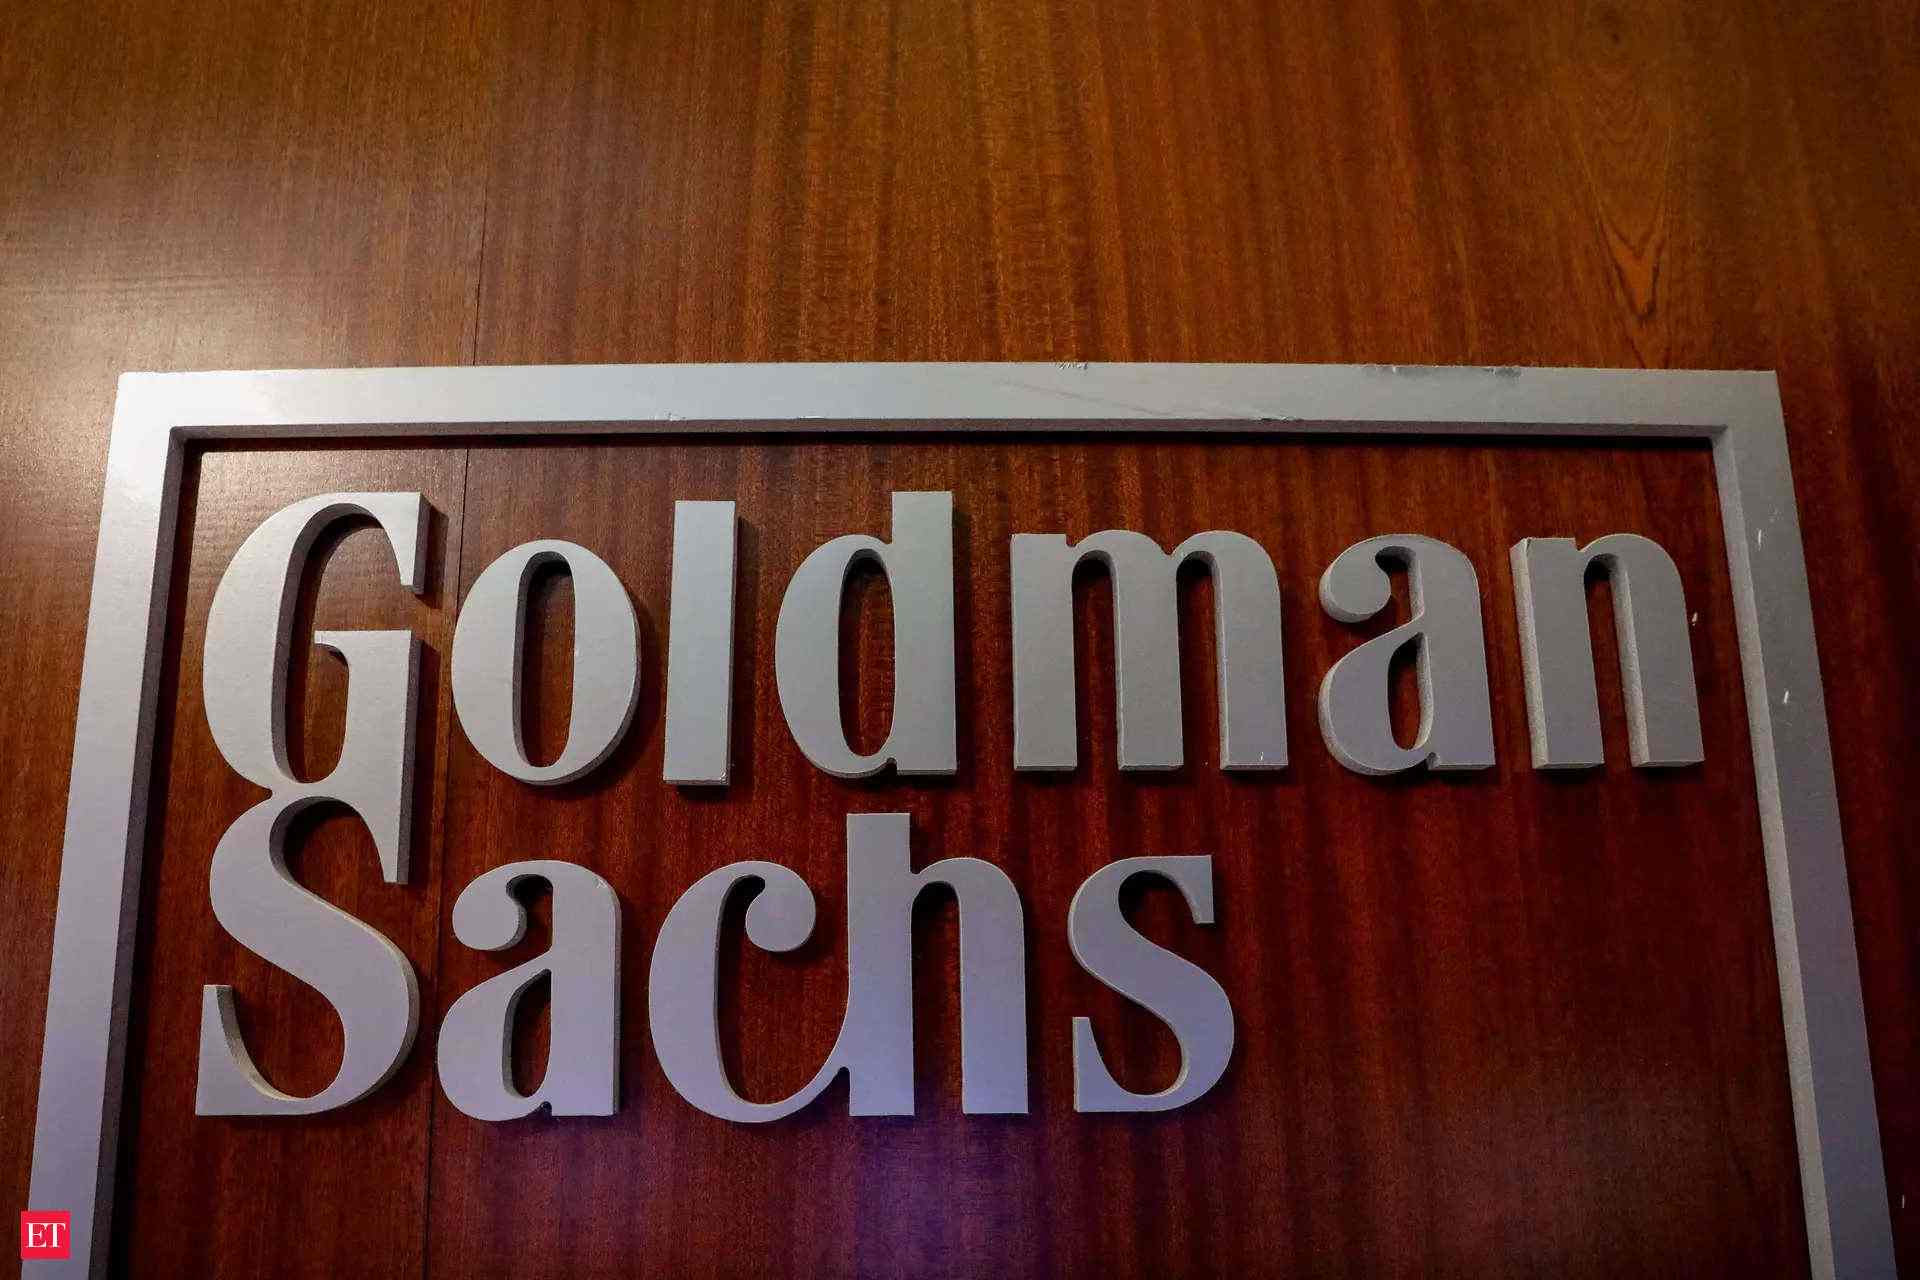 Goldman Sachs Is Going To Sell Part Of Its Wealth Businesses